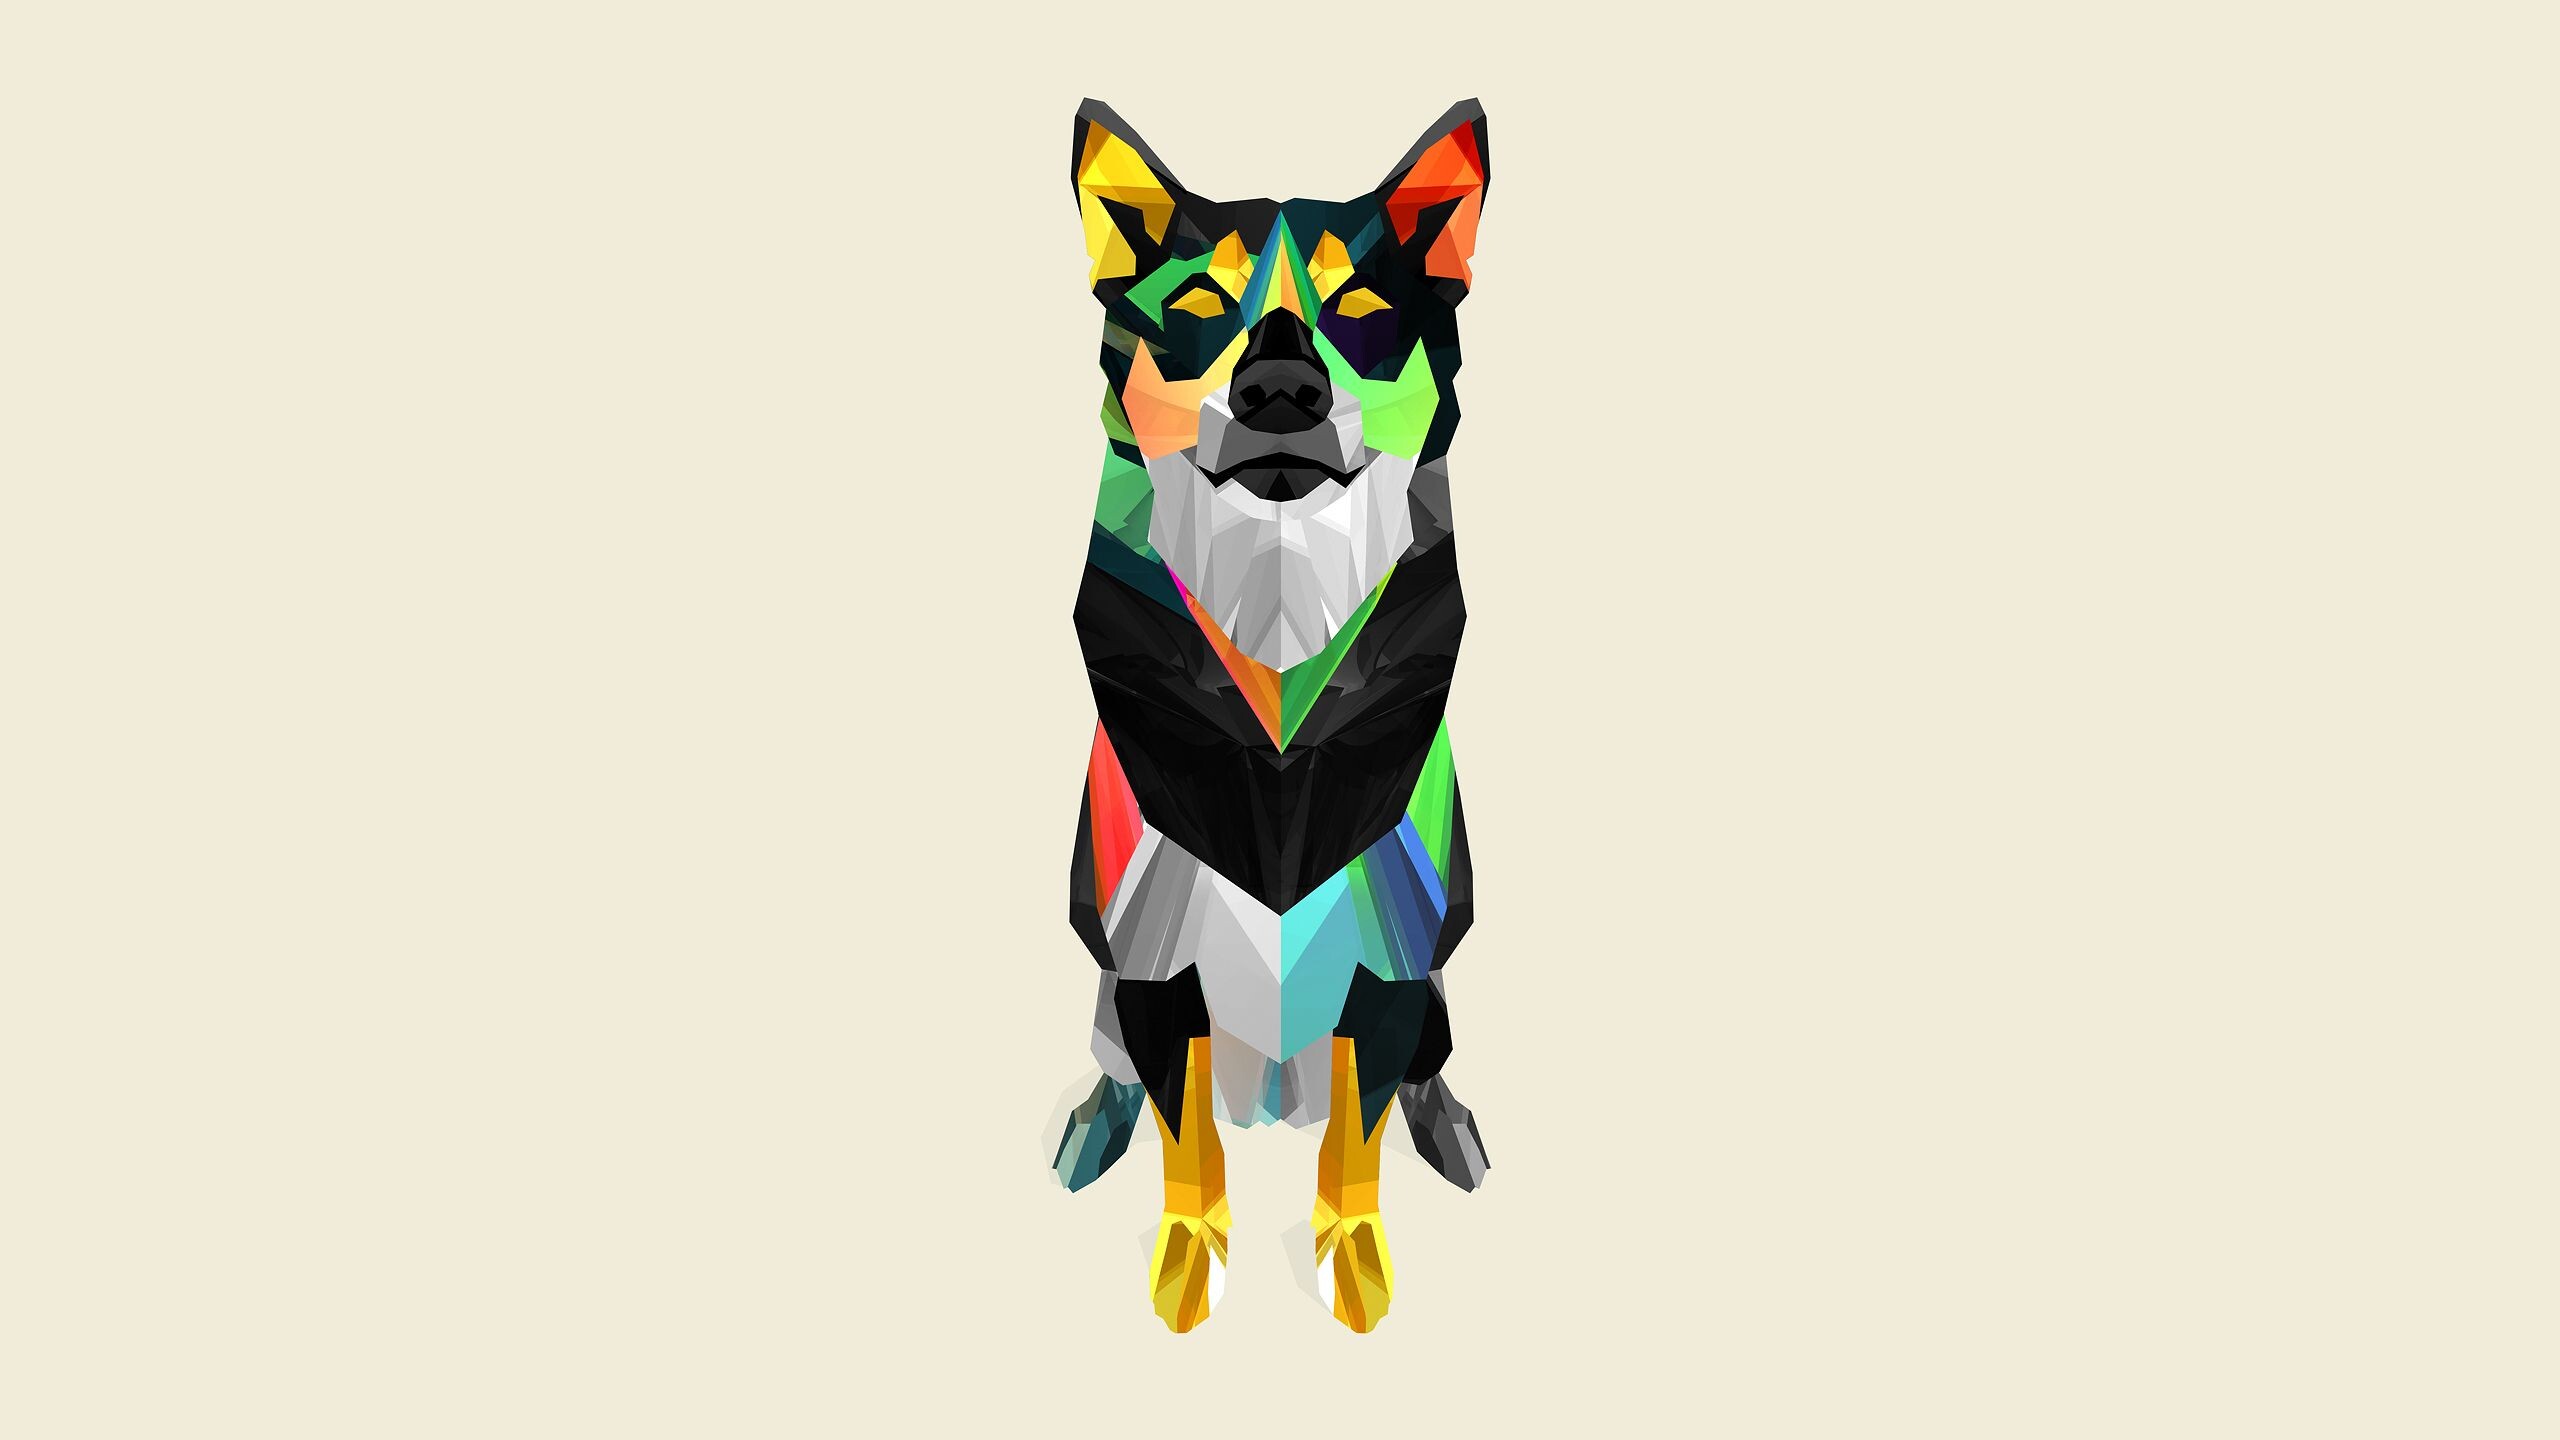 Geometric Animal: An abstract art form that uses basic regular shapes, Colorful dog. 2560x1440 HD Wallpaper.